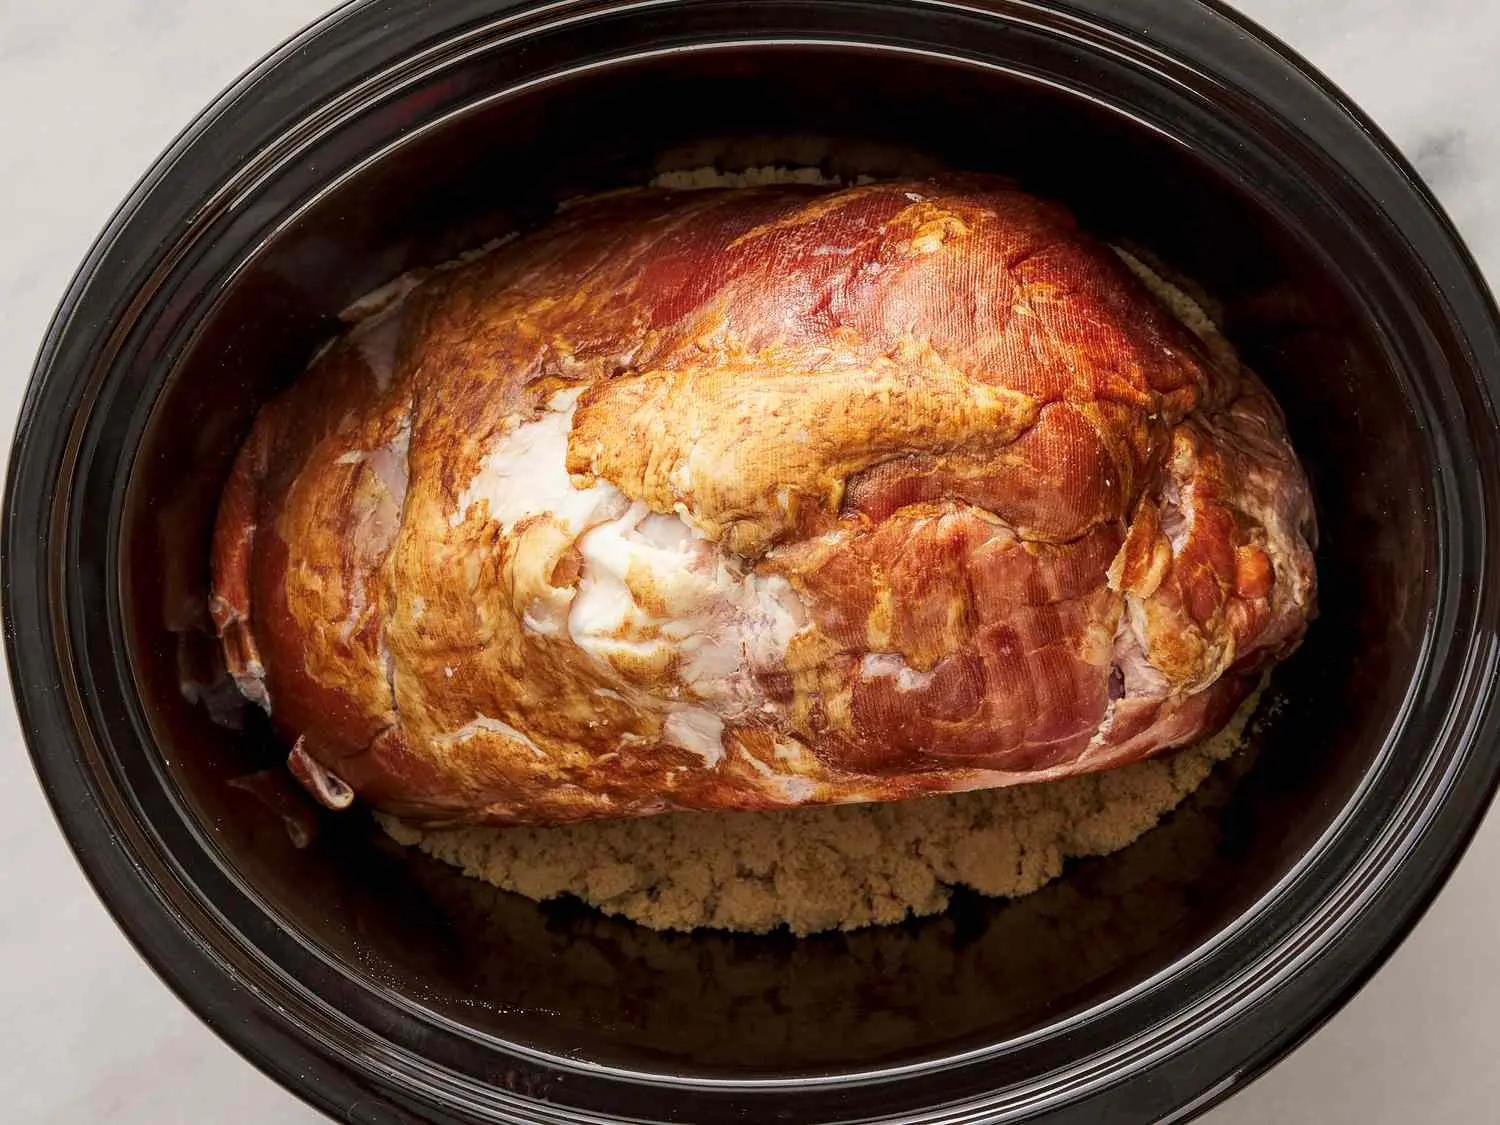 slow cooker smoked ham - Do you cook ham on low or high in a slow cooker